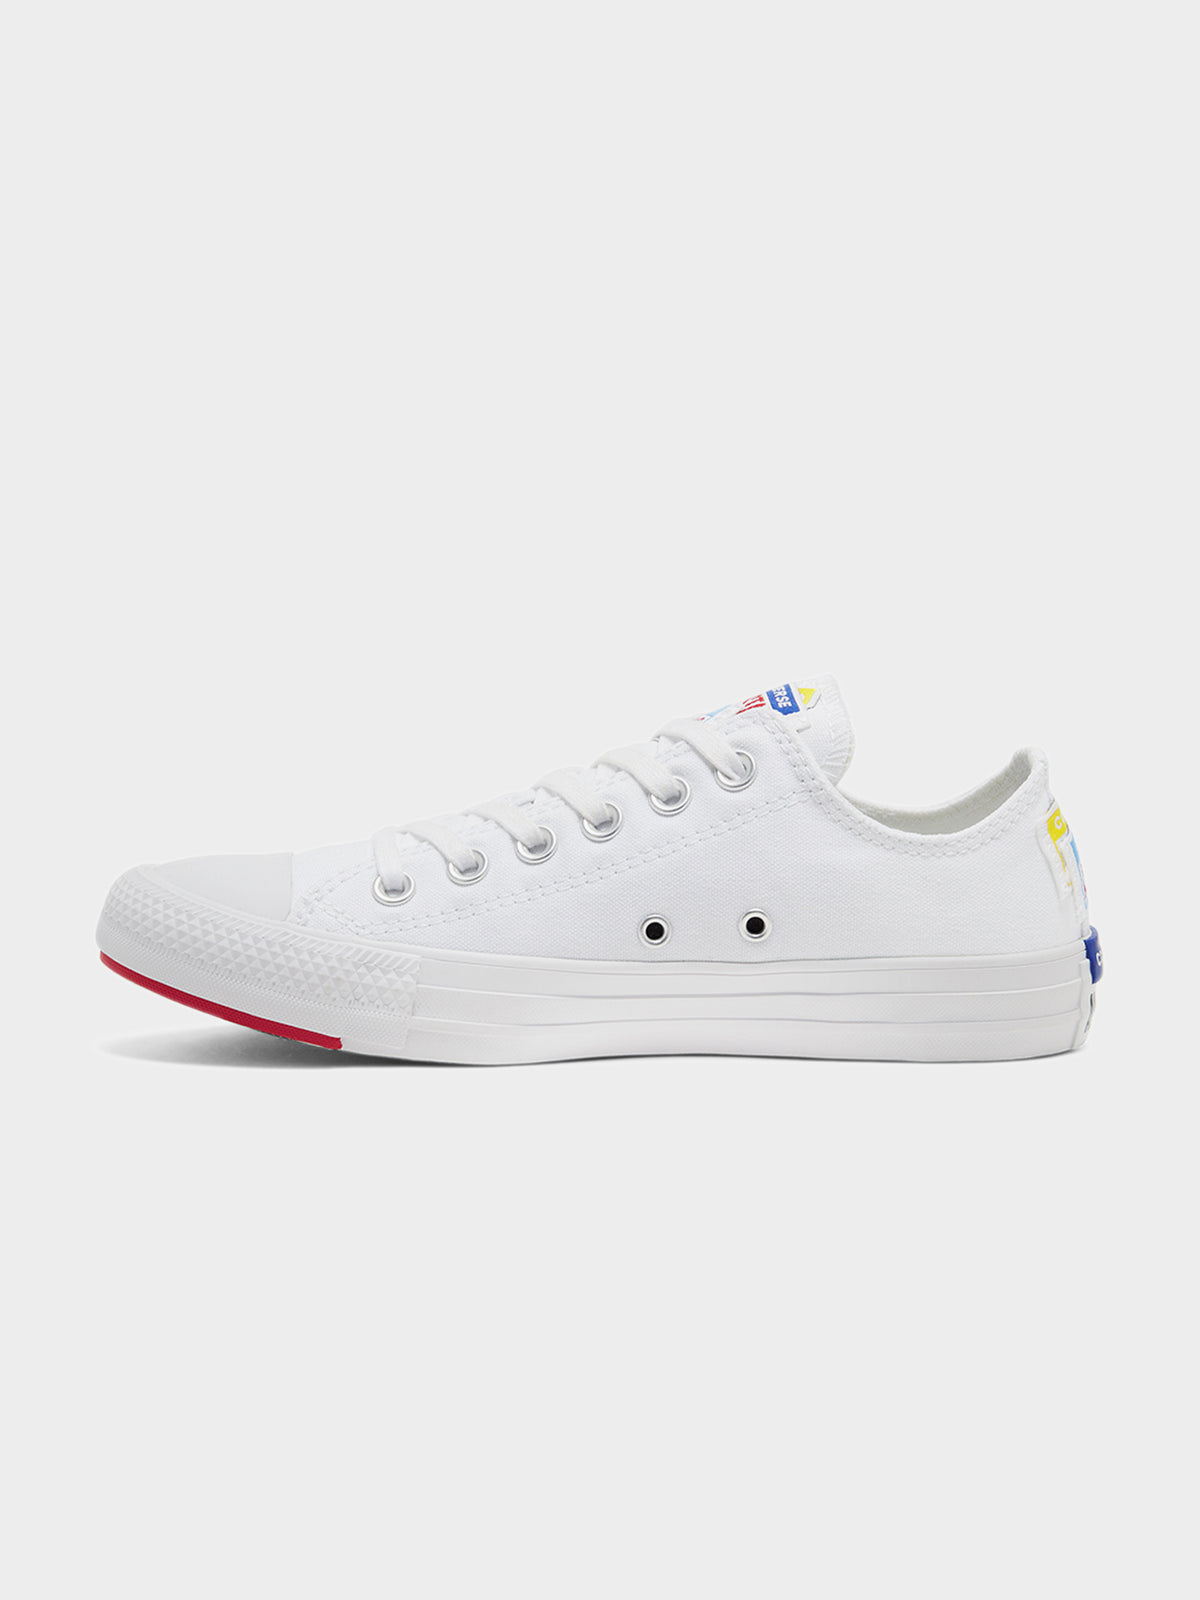 Unisex Chuck Taylor All Star Stacked Logo Low Top Sneakers in White